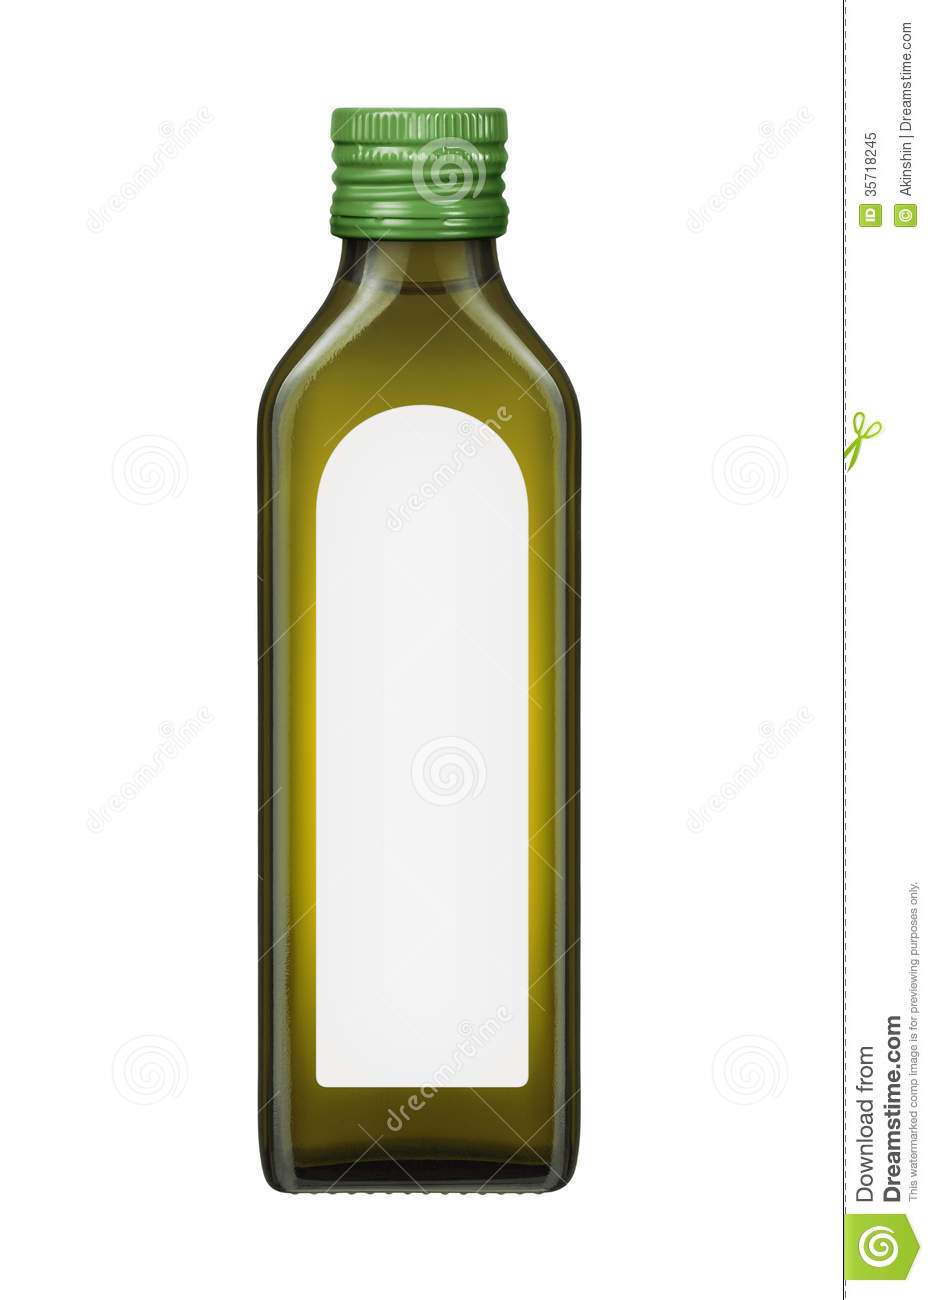 Olive Oil Bottle With Blank Label Royalty Free Stock Photo   Image